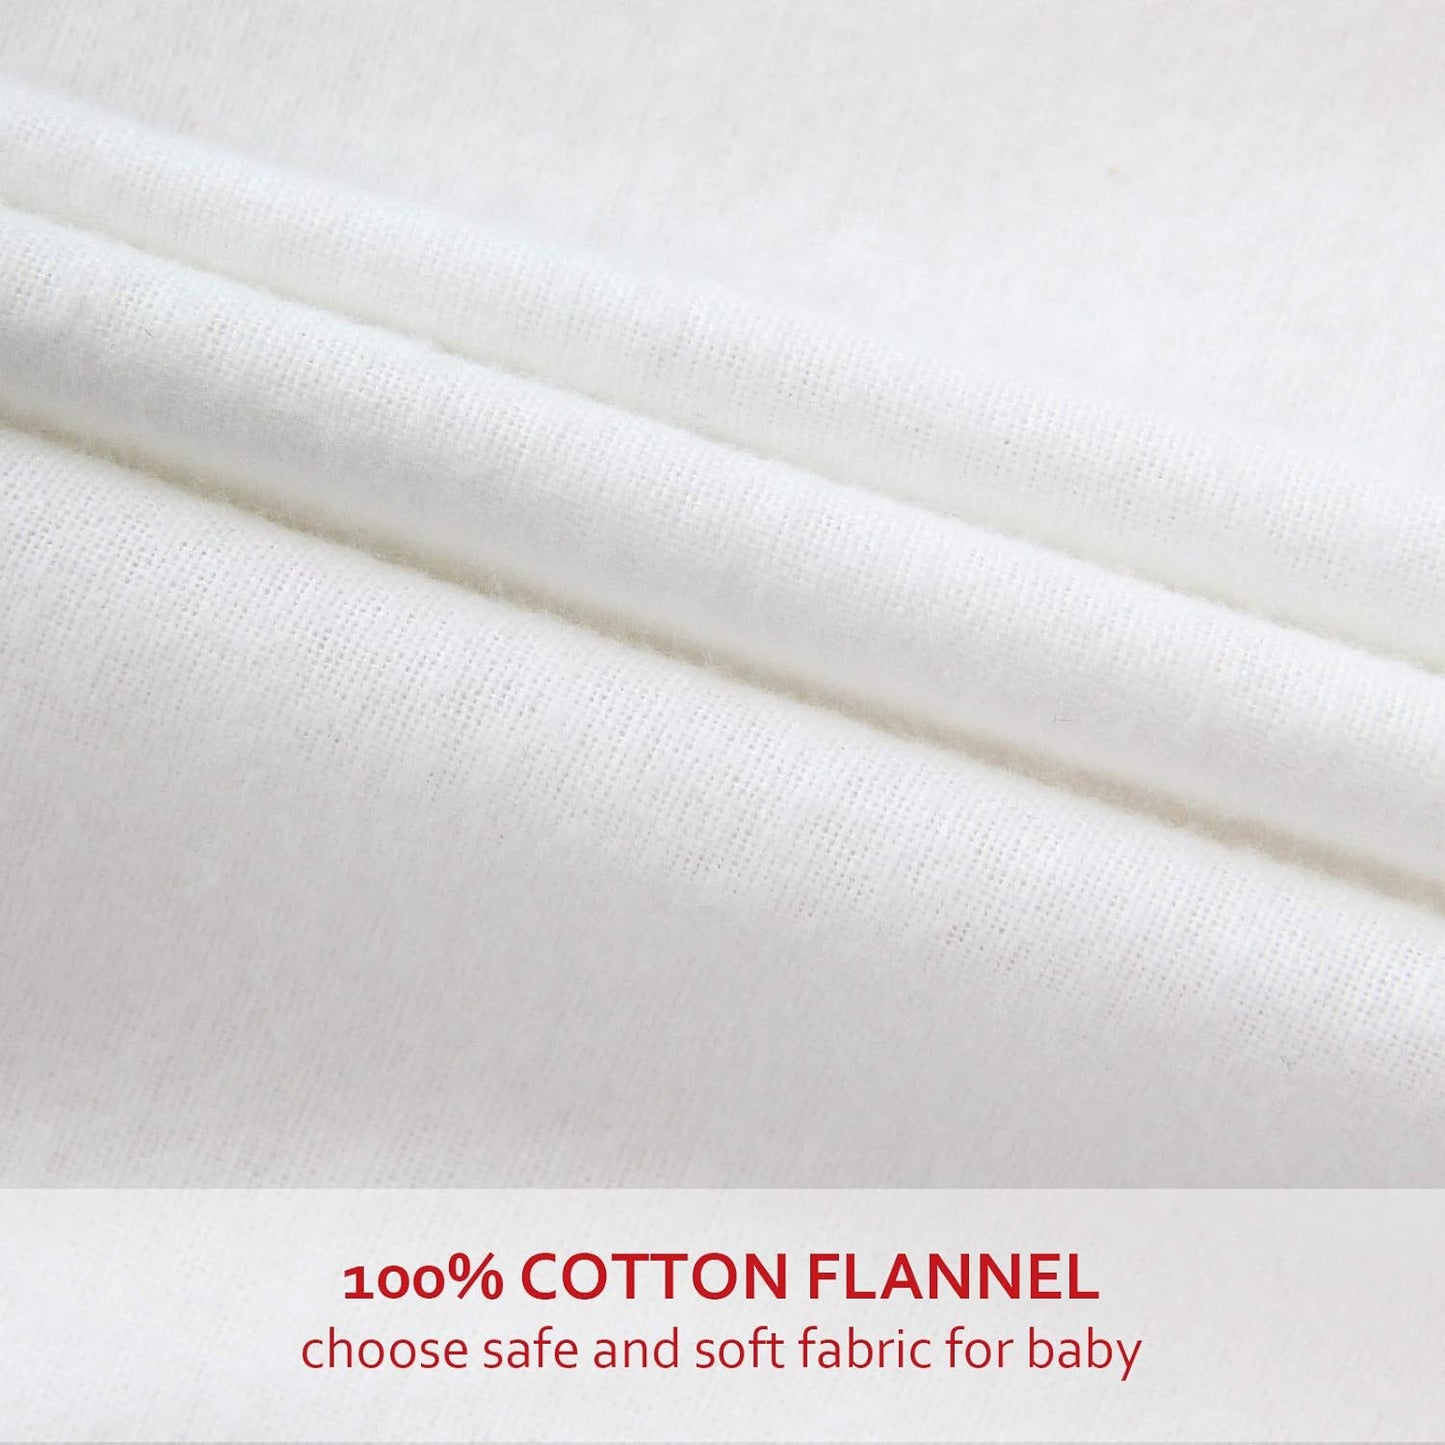 Pack n Play Sheet | Mini Crib Sheet - 100% Cotton Flannel, Fits Graco Pack and Play, White